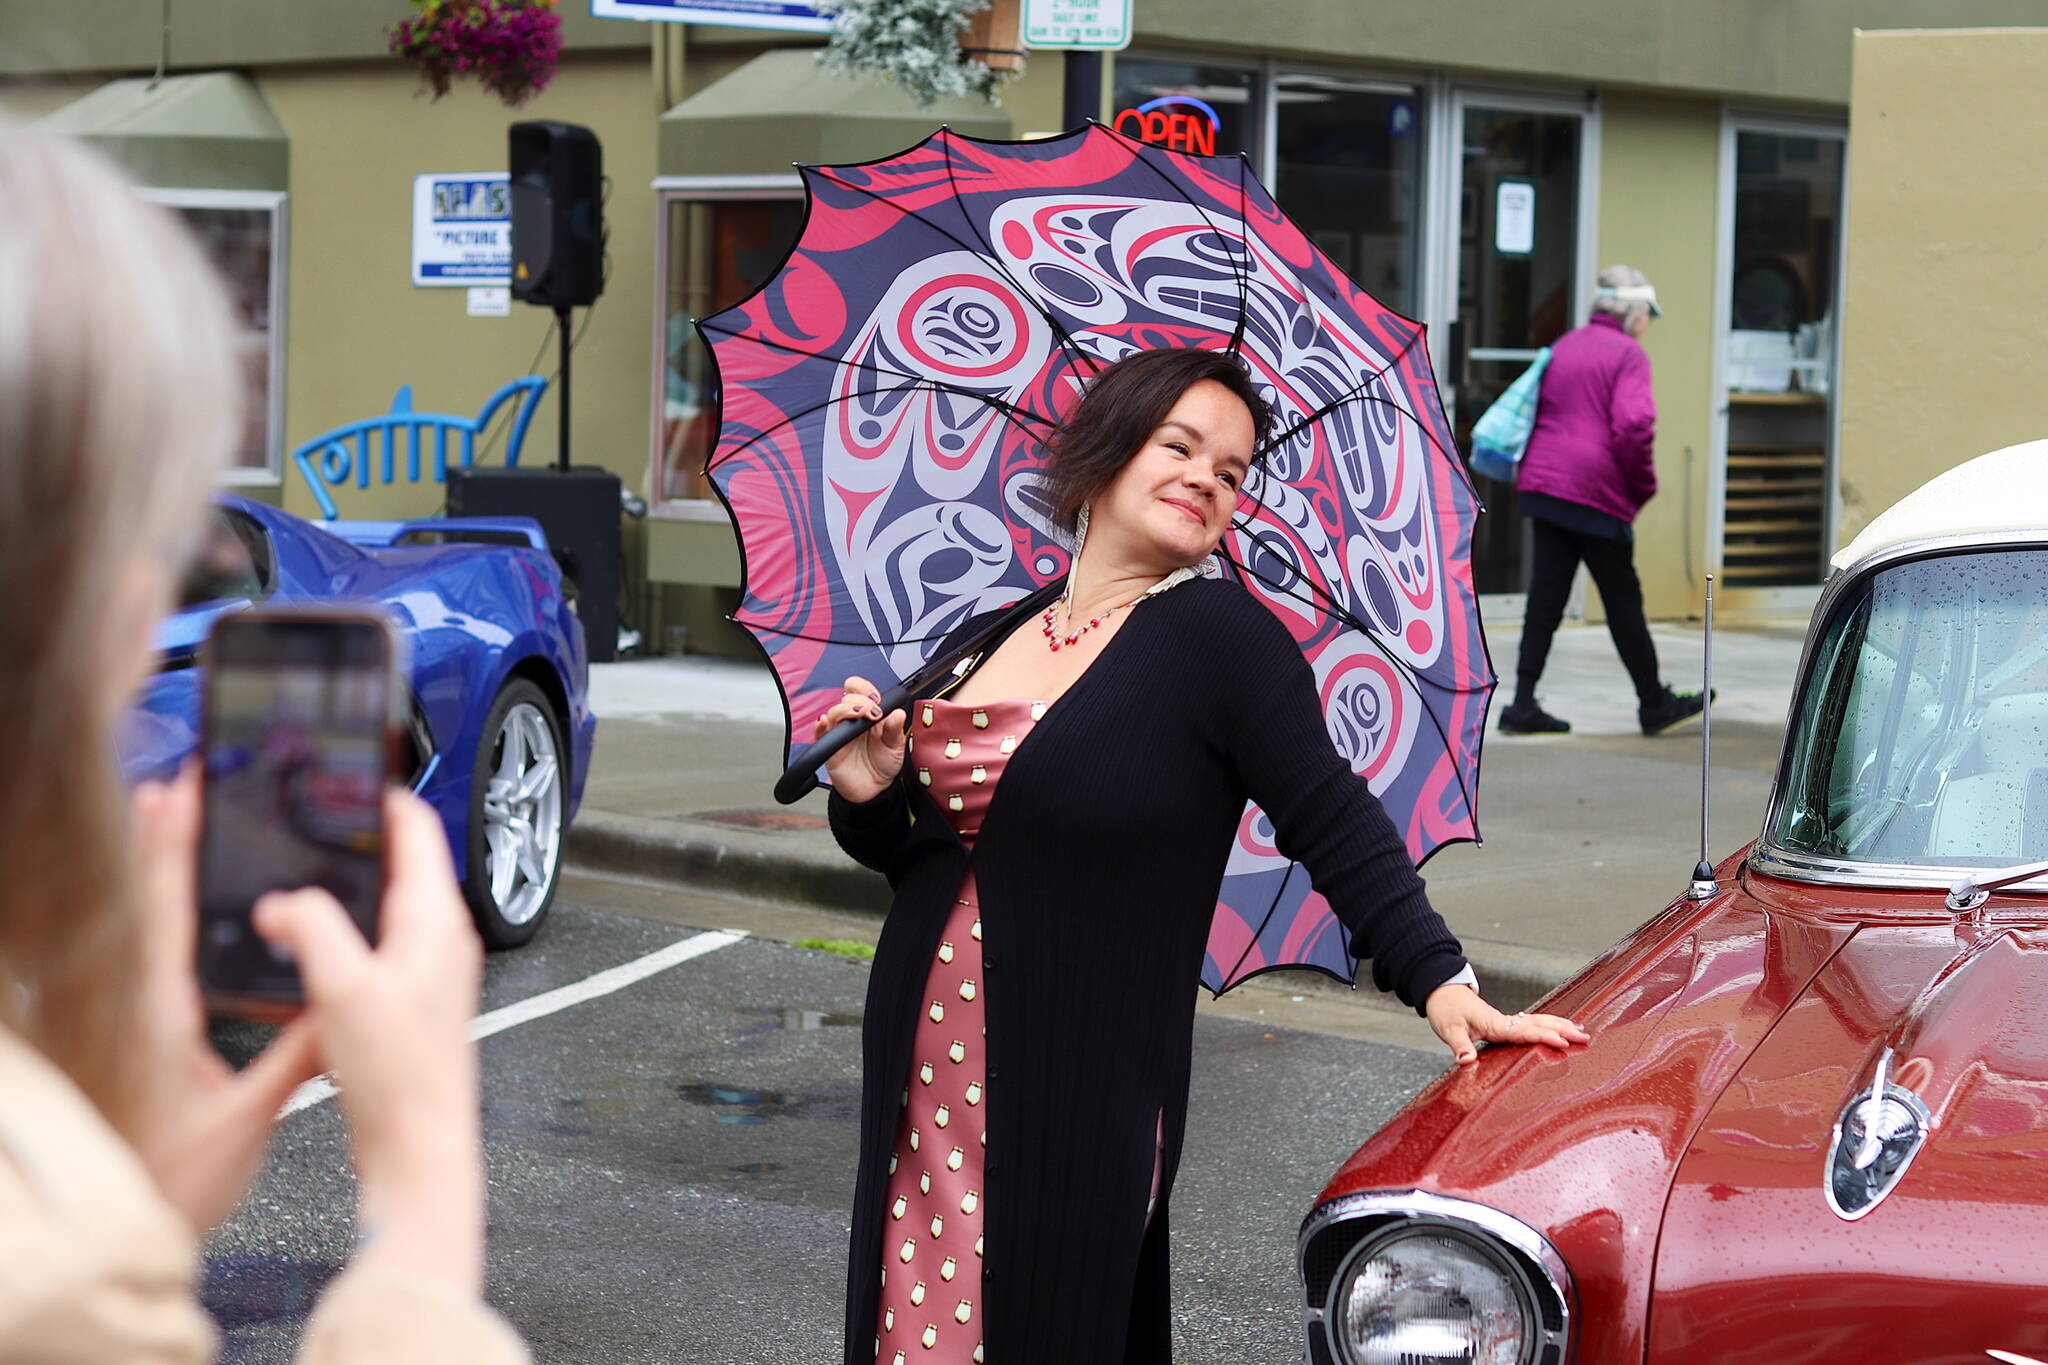 Lily Wooshkindein Da.áat Hope, a Chilkat weaver in Juneau, poses next an antique car for a photo by an audience member during Alaska Fashion Weeks outdoor runway show on Saturday. Hope was among the local designers whose outfits were featured during the show. The antique vehicles were parked along the street to provide ambiance for the outdoor exhibition. (Mark Sabbatini / Juneau Empire)